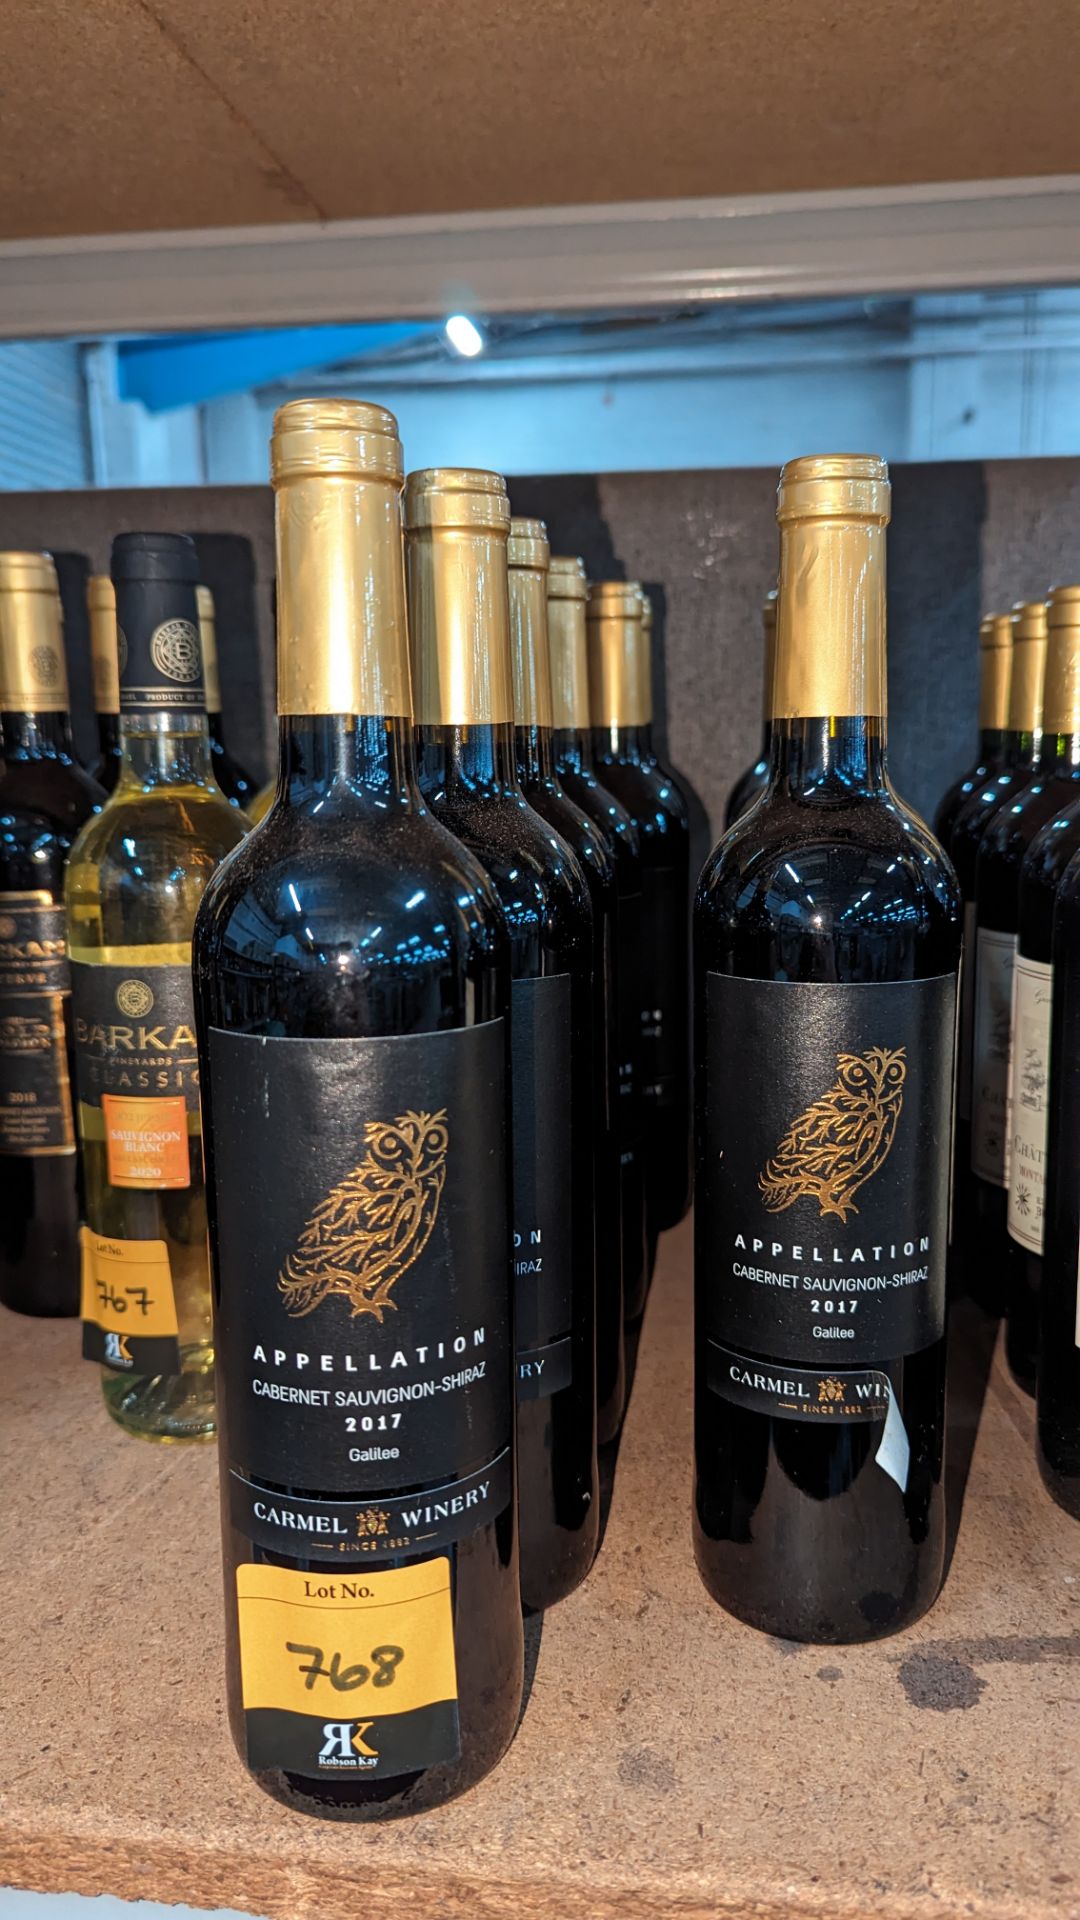 11 bottles of Carmel Winery Appellation Cabernet Sauvignon-Shiraz 2017 Israeli red wine sold under A - Image 3 of 4